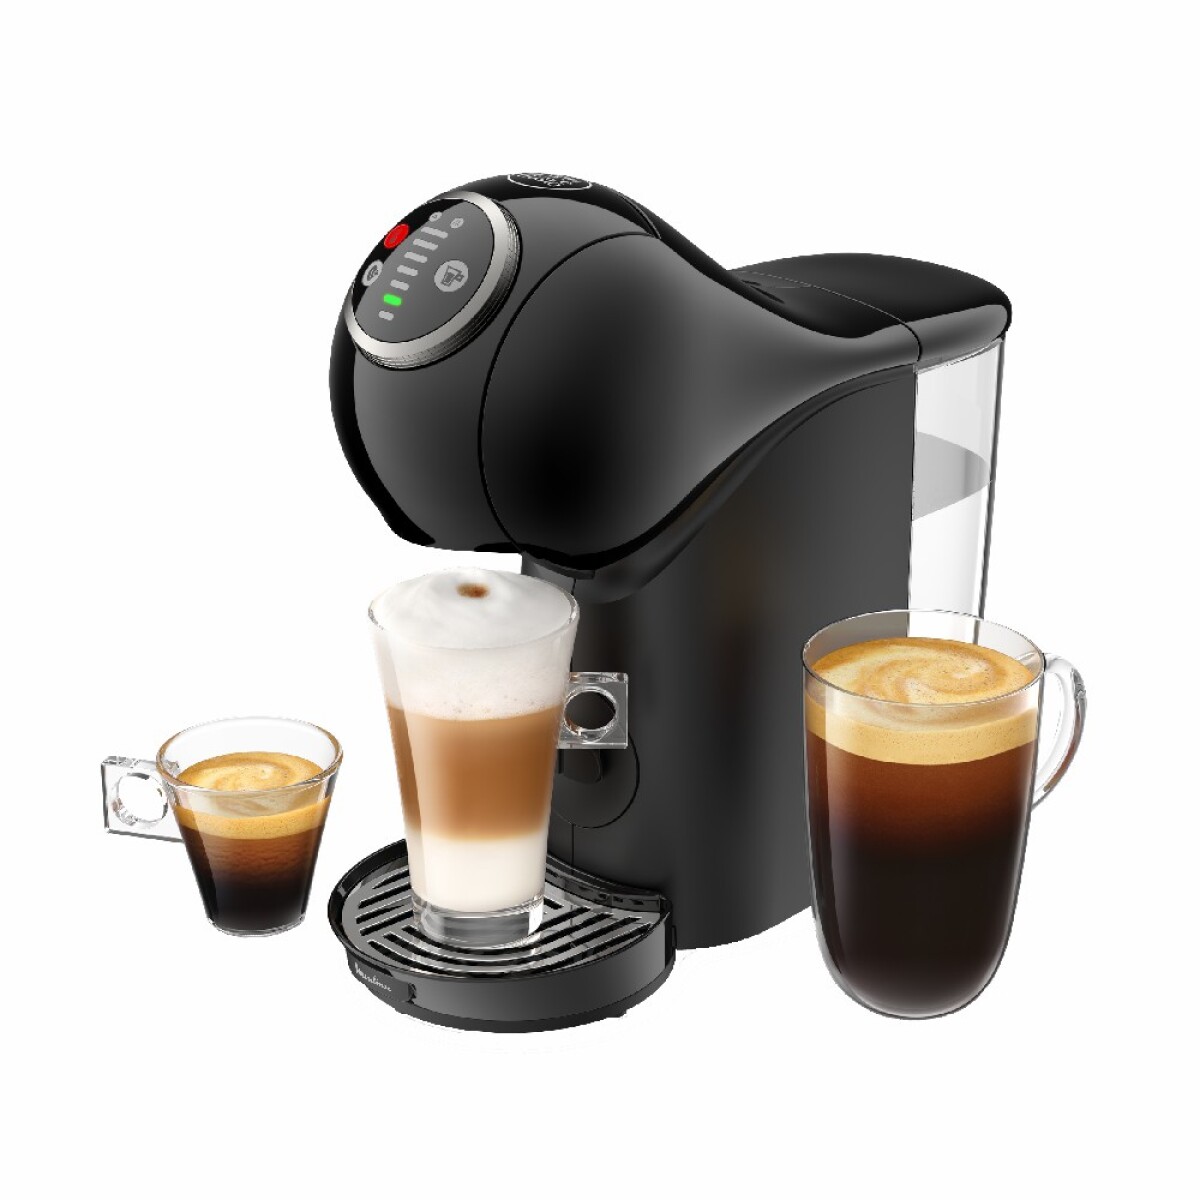 Cafetera Dolce Gusto Genio S - 001 